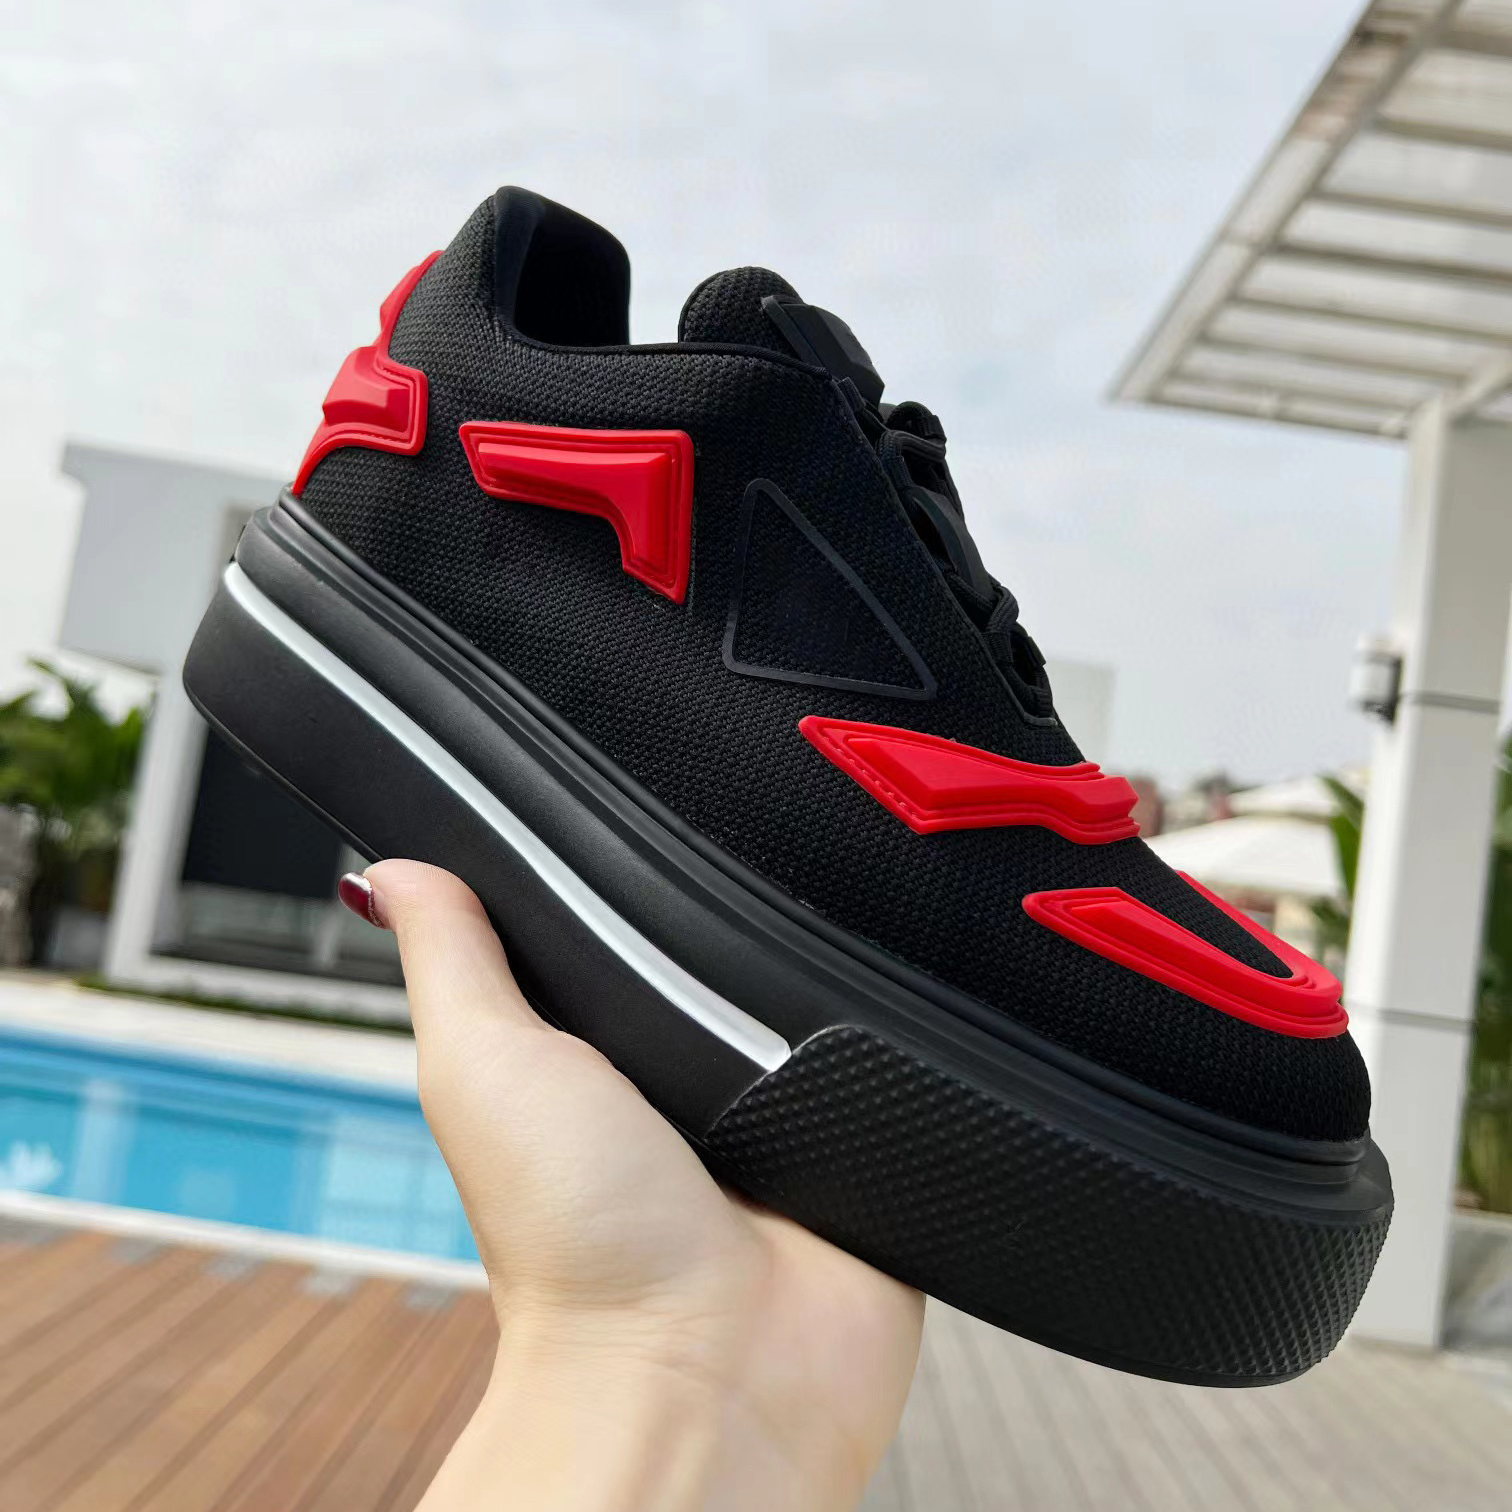 Designer new casual shoes thick sole heightens men women breathable mesh cloth hundred match men shoes white black orange match color sneakers